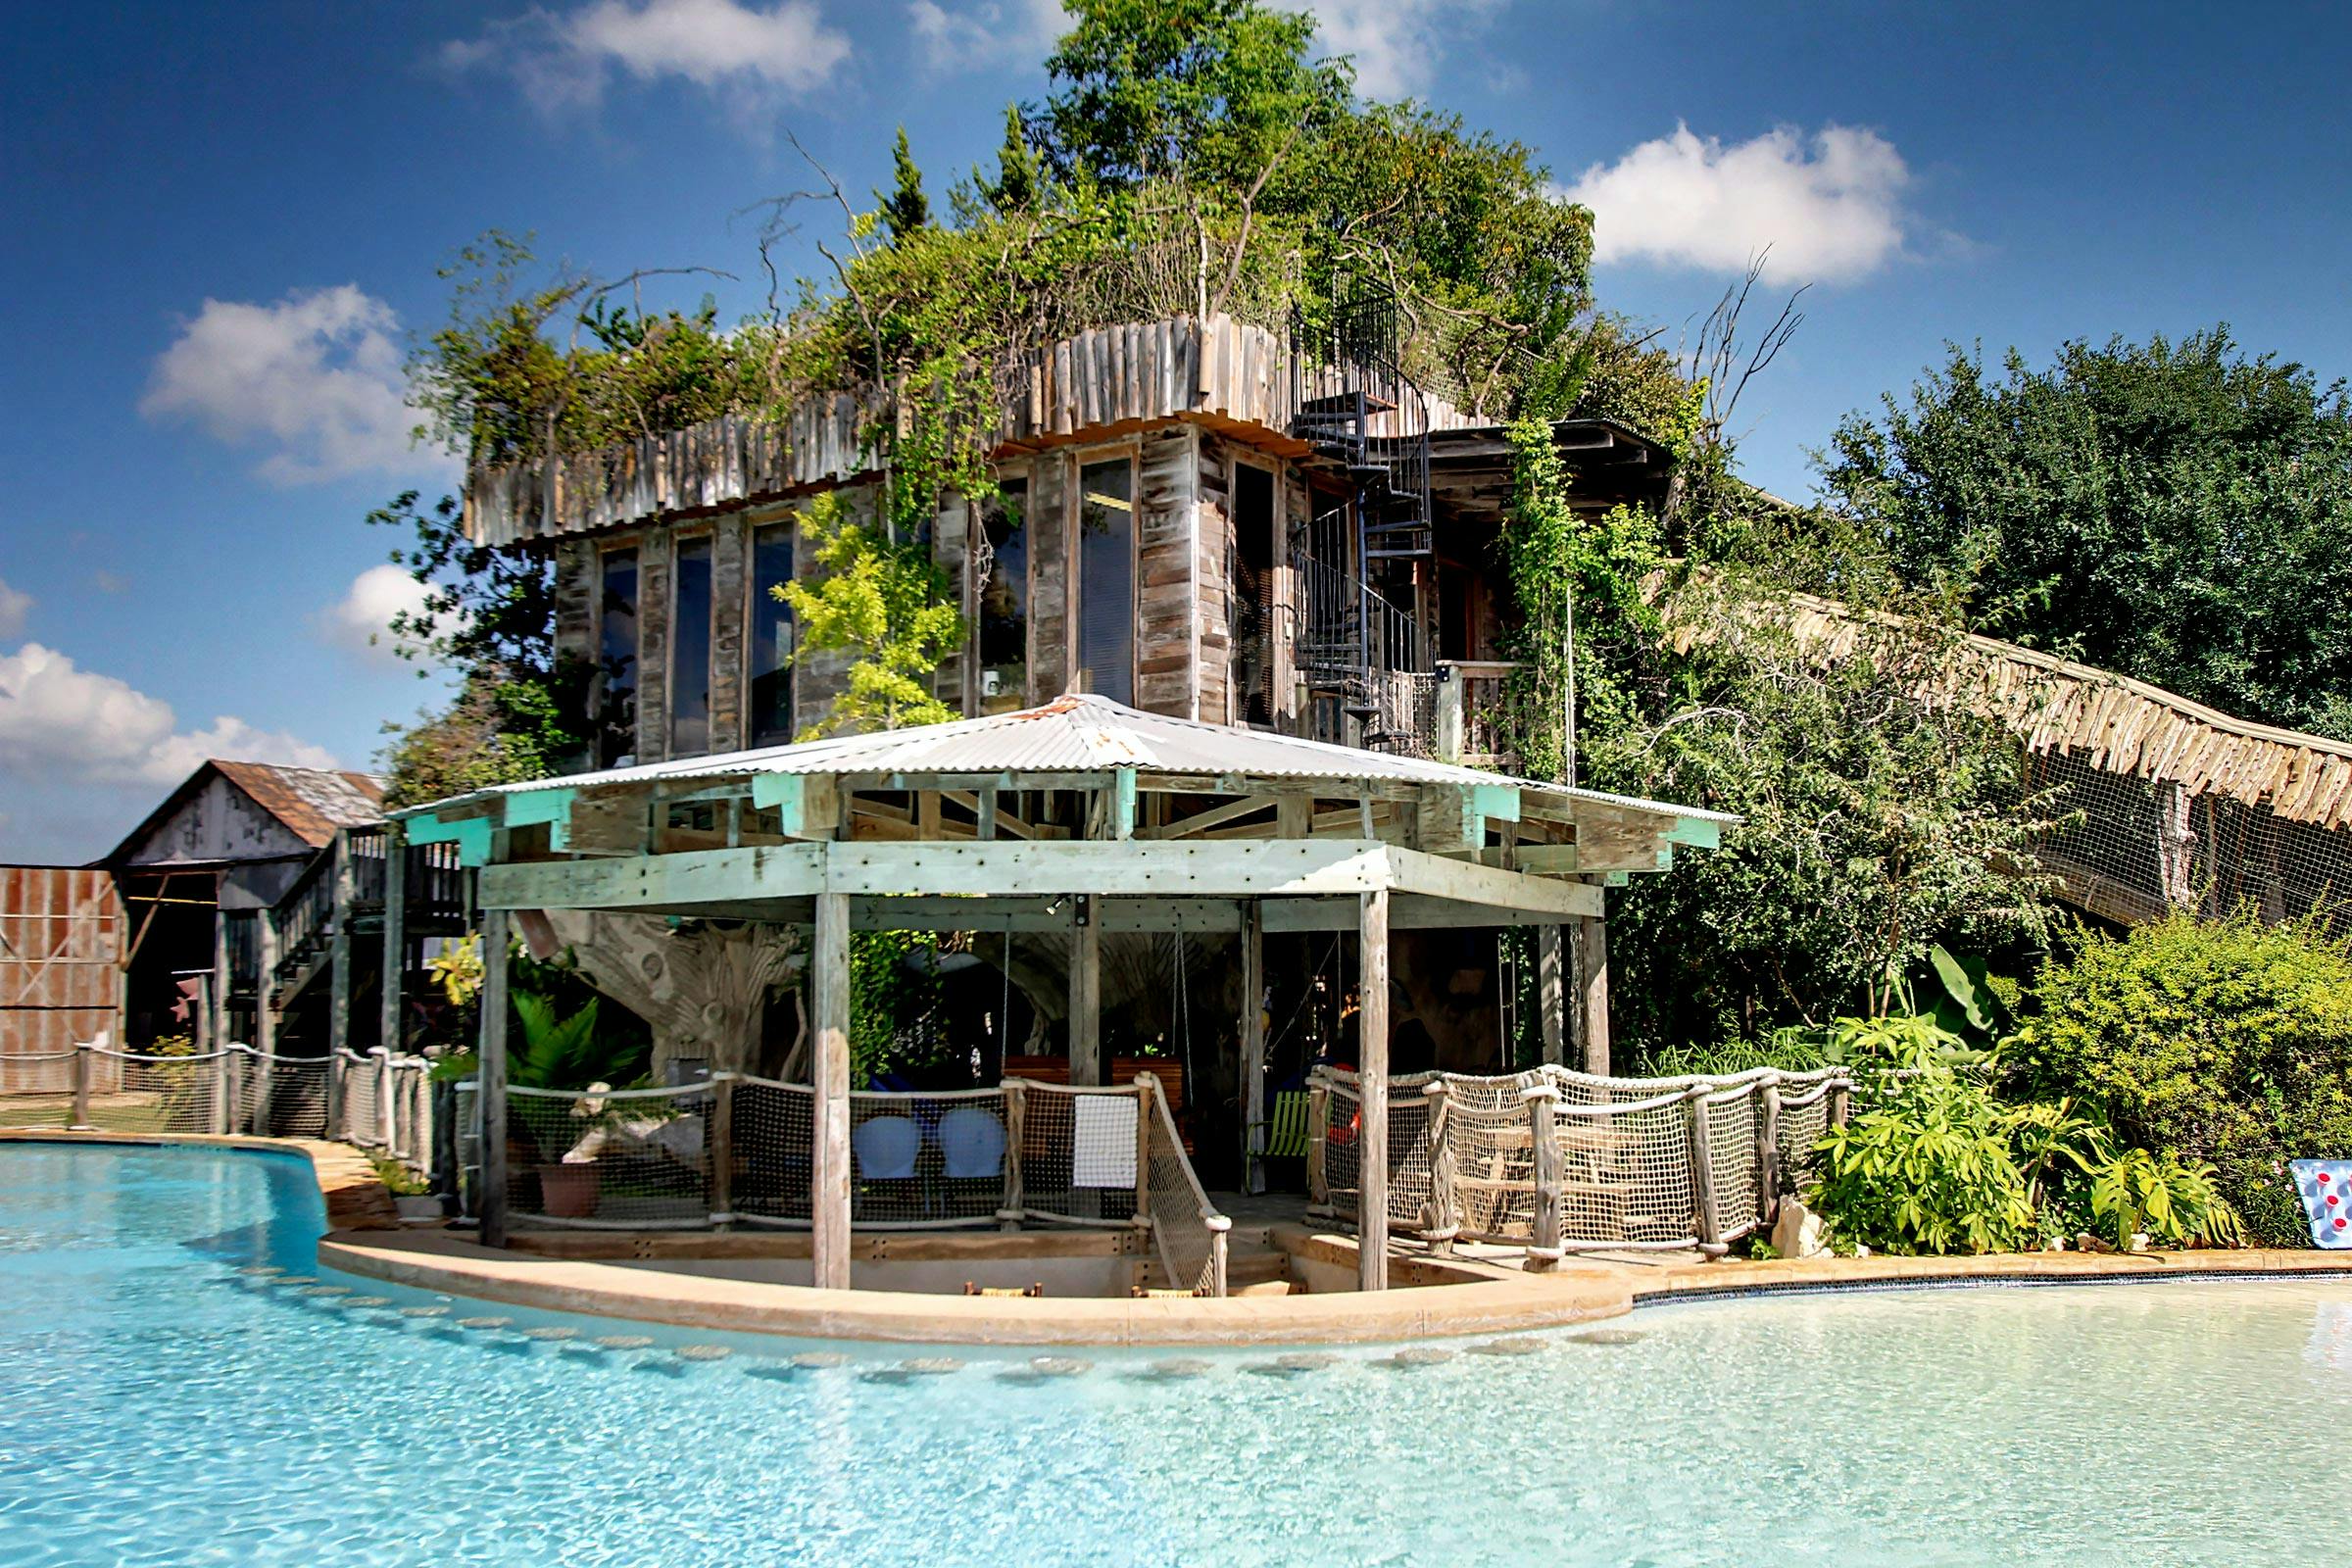 Treehouse with pool at Guadalupe River Houses. 